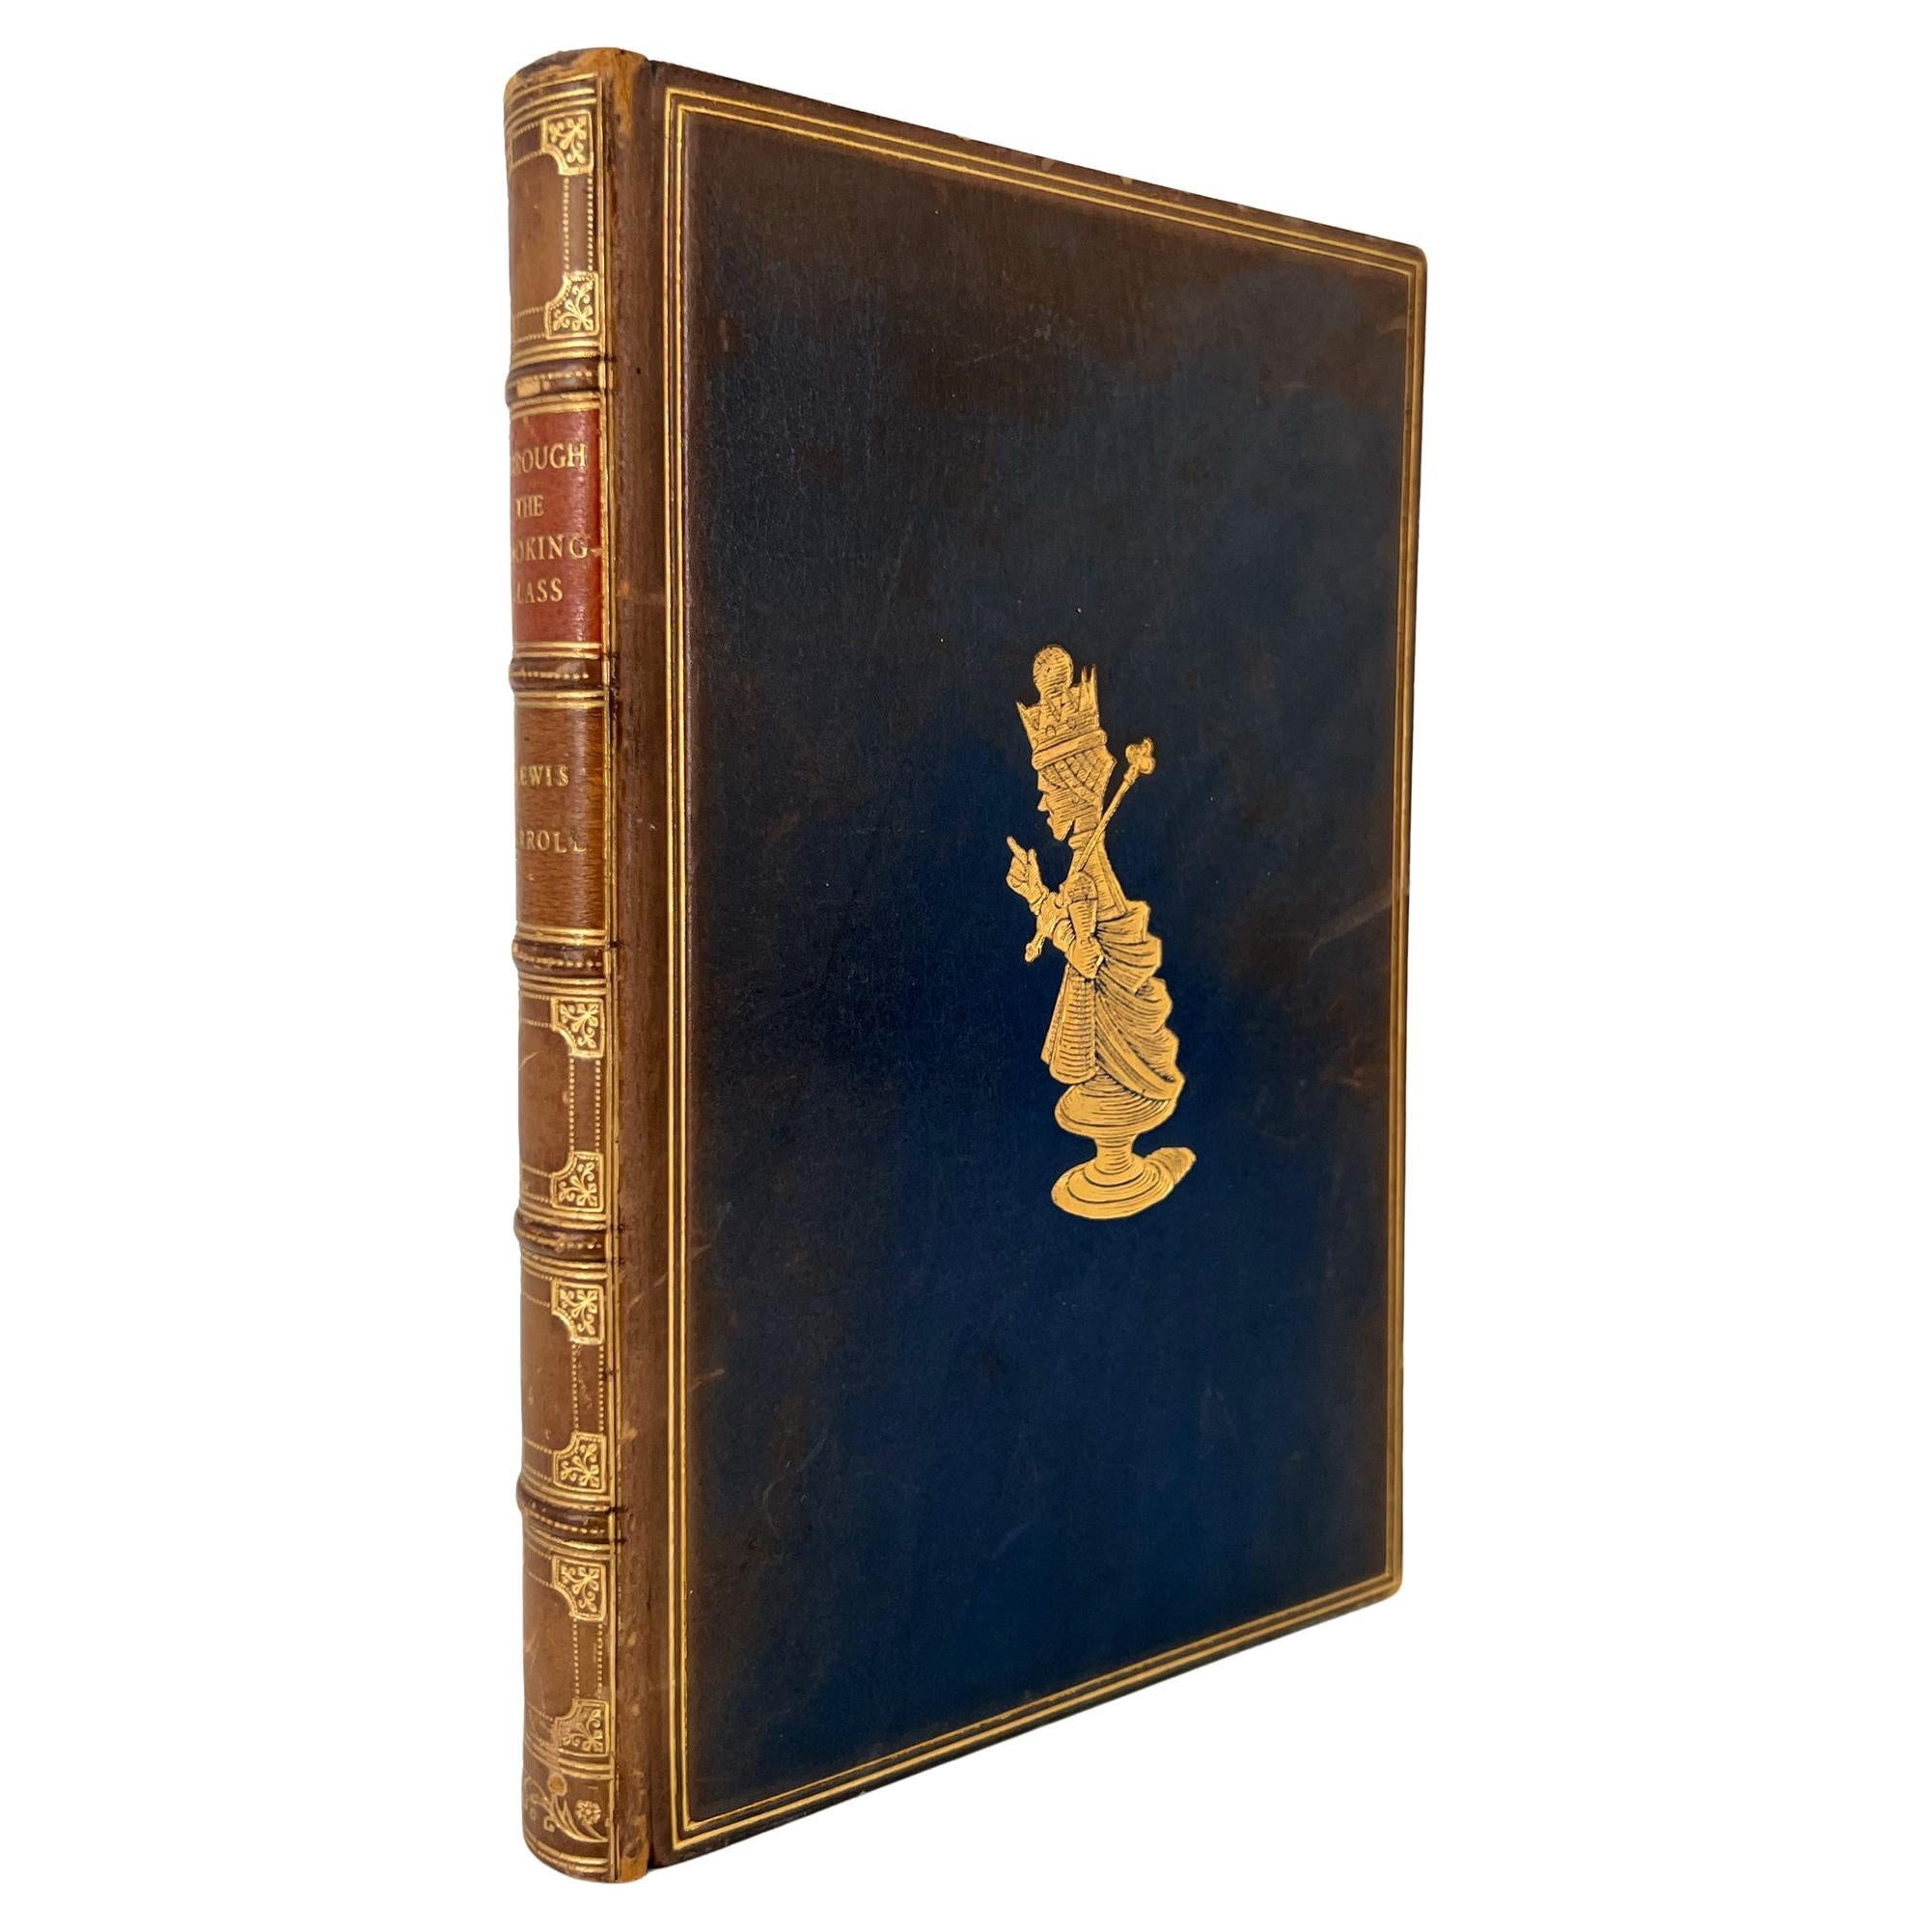 Through the Looking Glass by Lewis Carroll - Beautiful binding